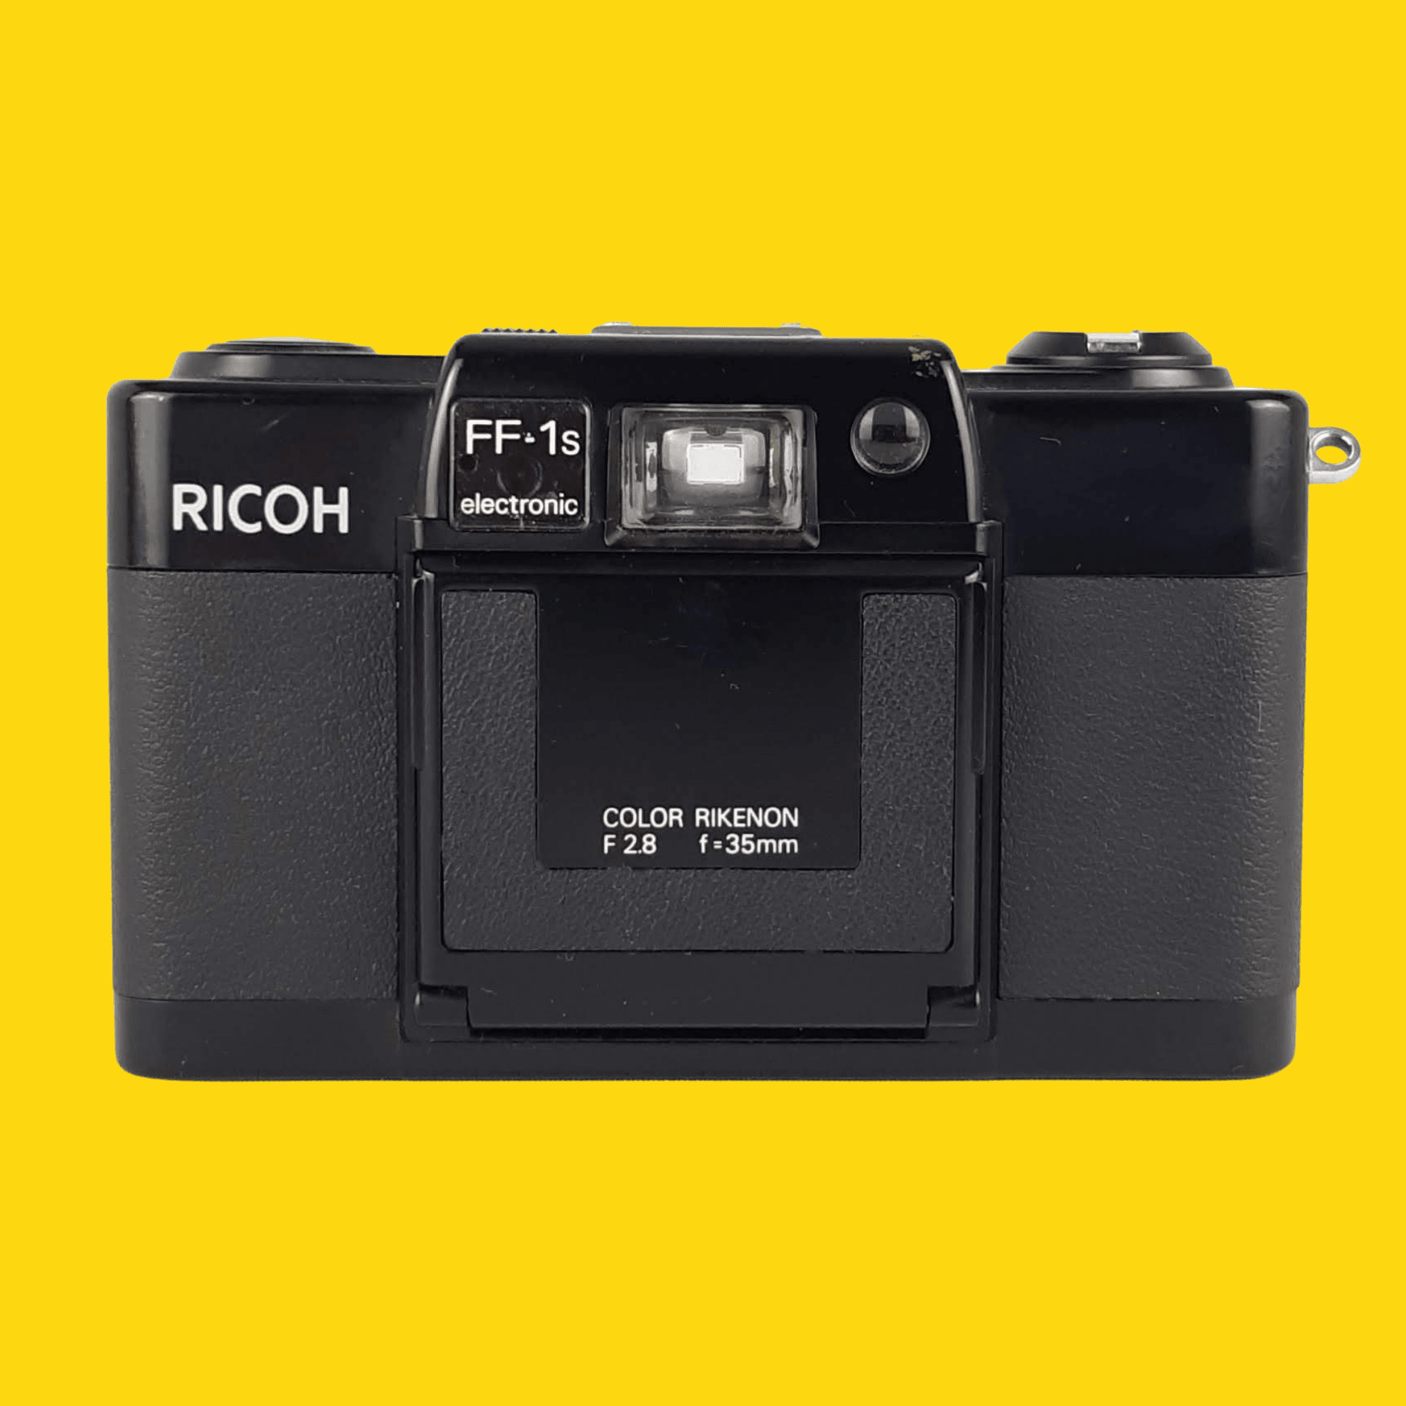 Ricoh FF-1s 35mm Film Camera Point and Shoot